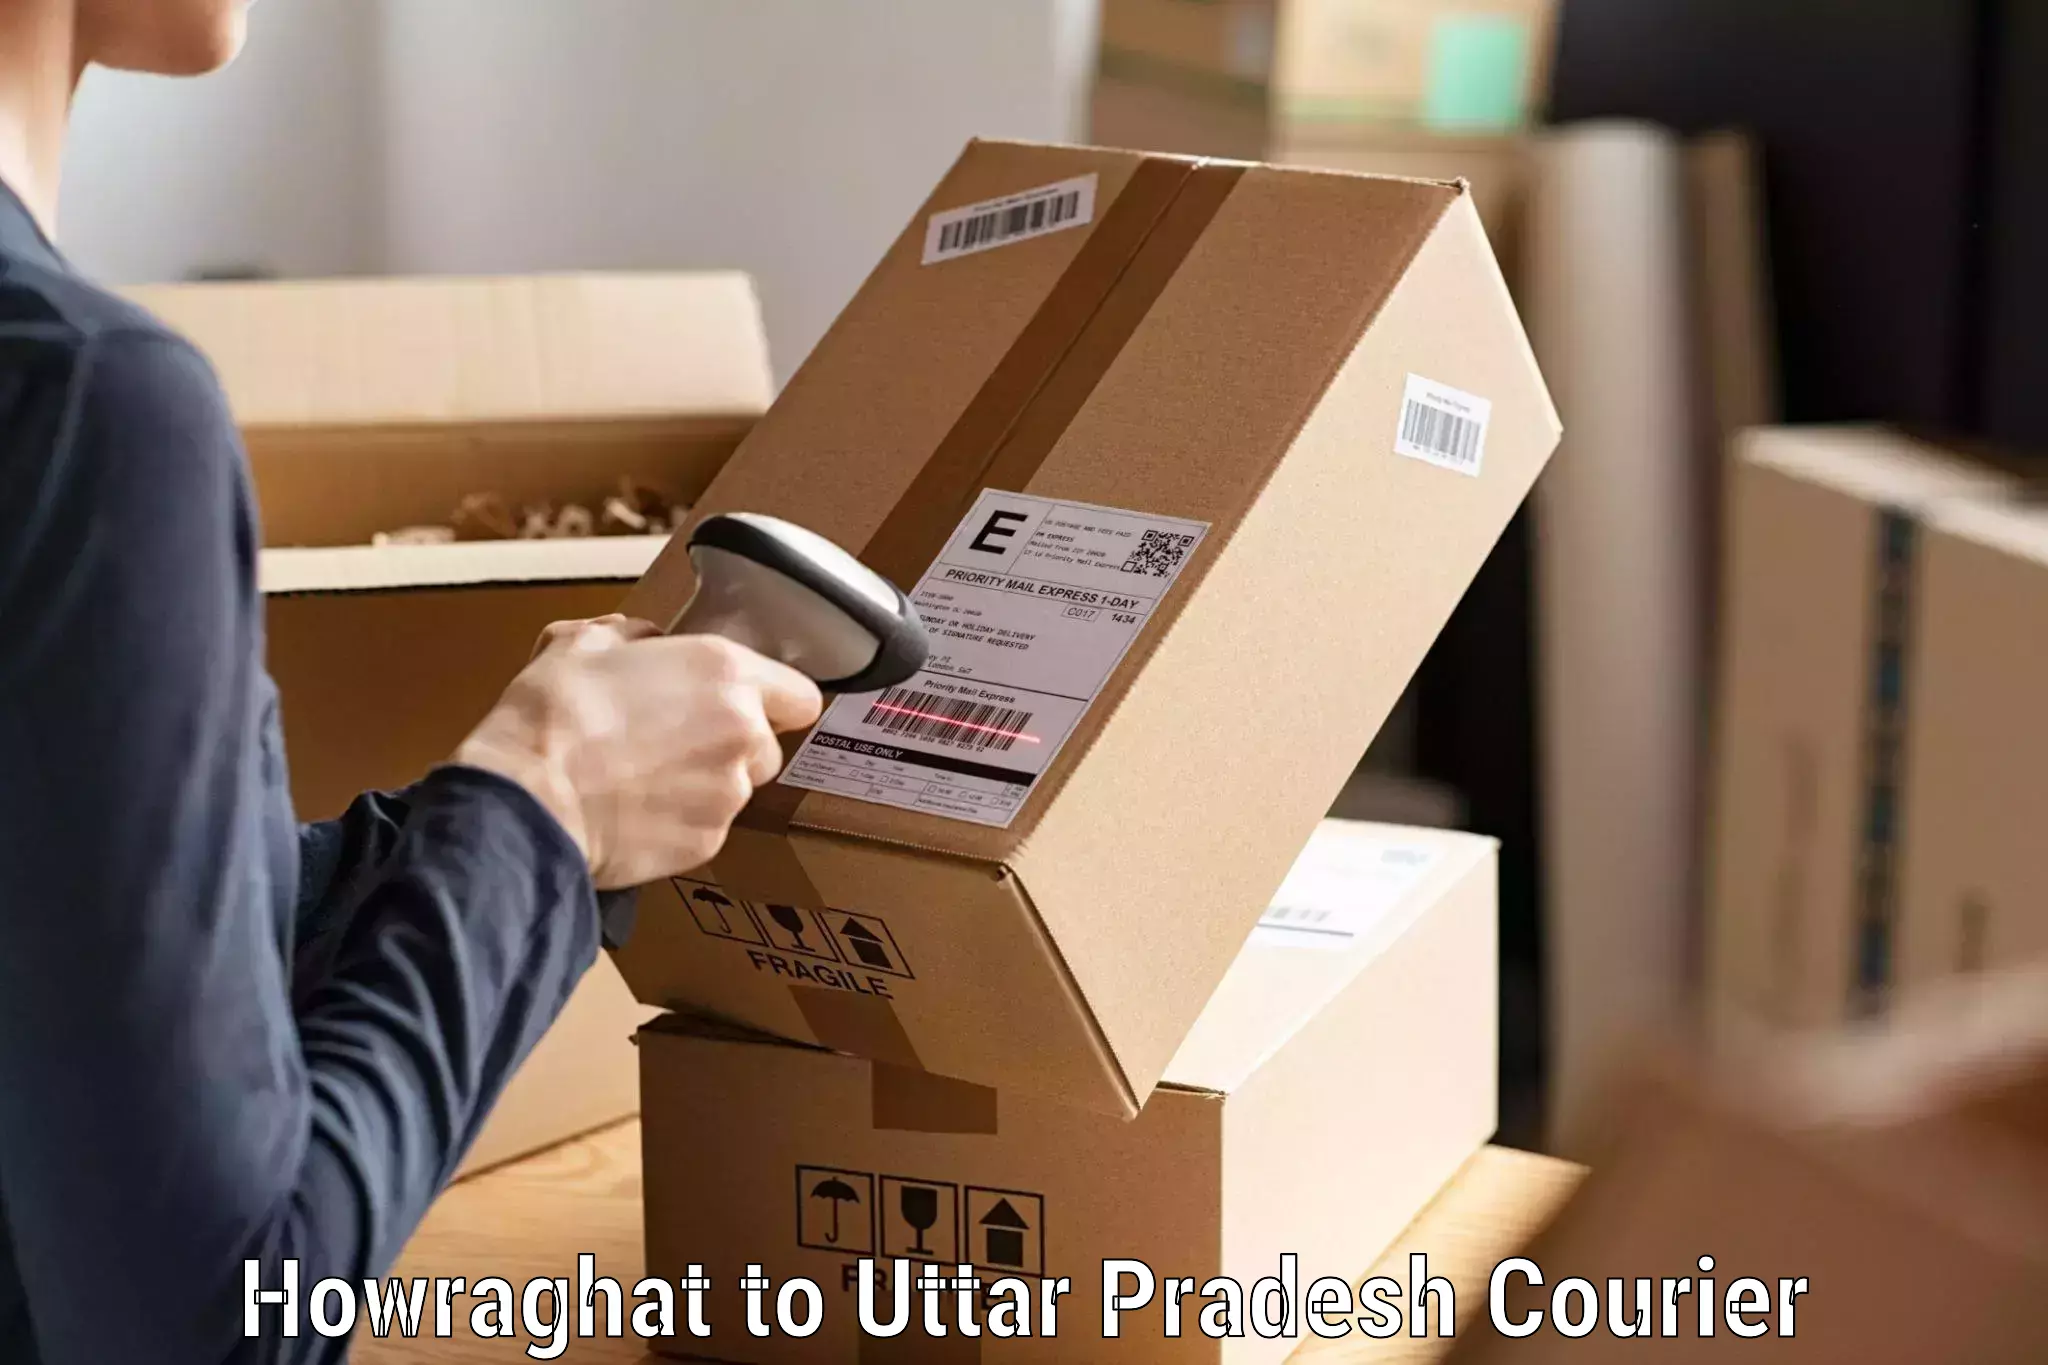 High-quality delivery services Howraghat to Rajesultanpur